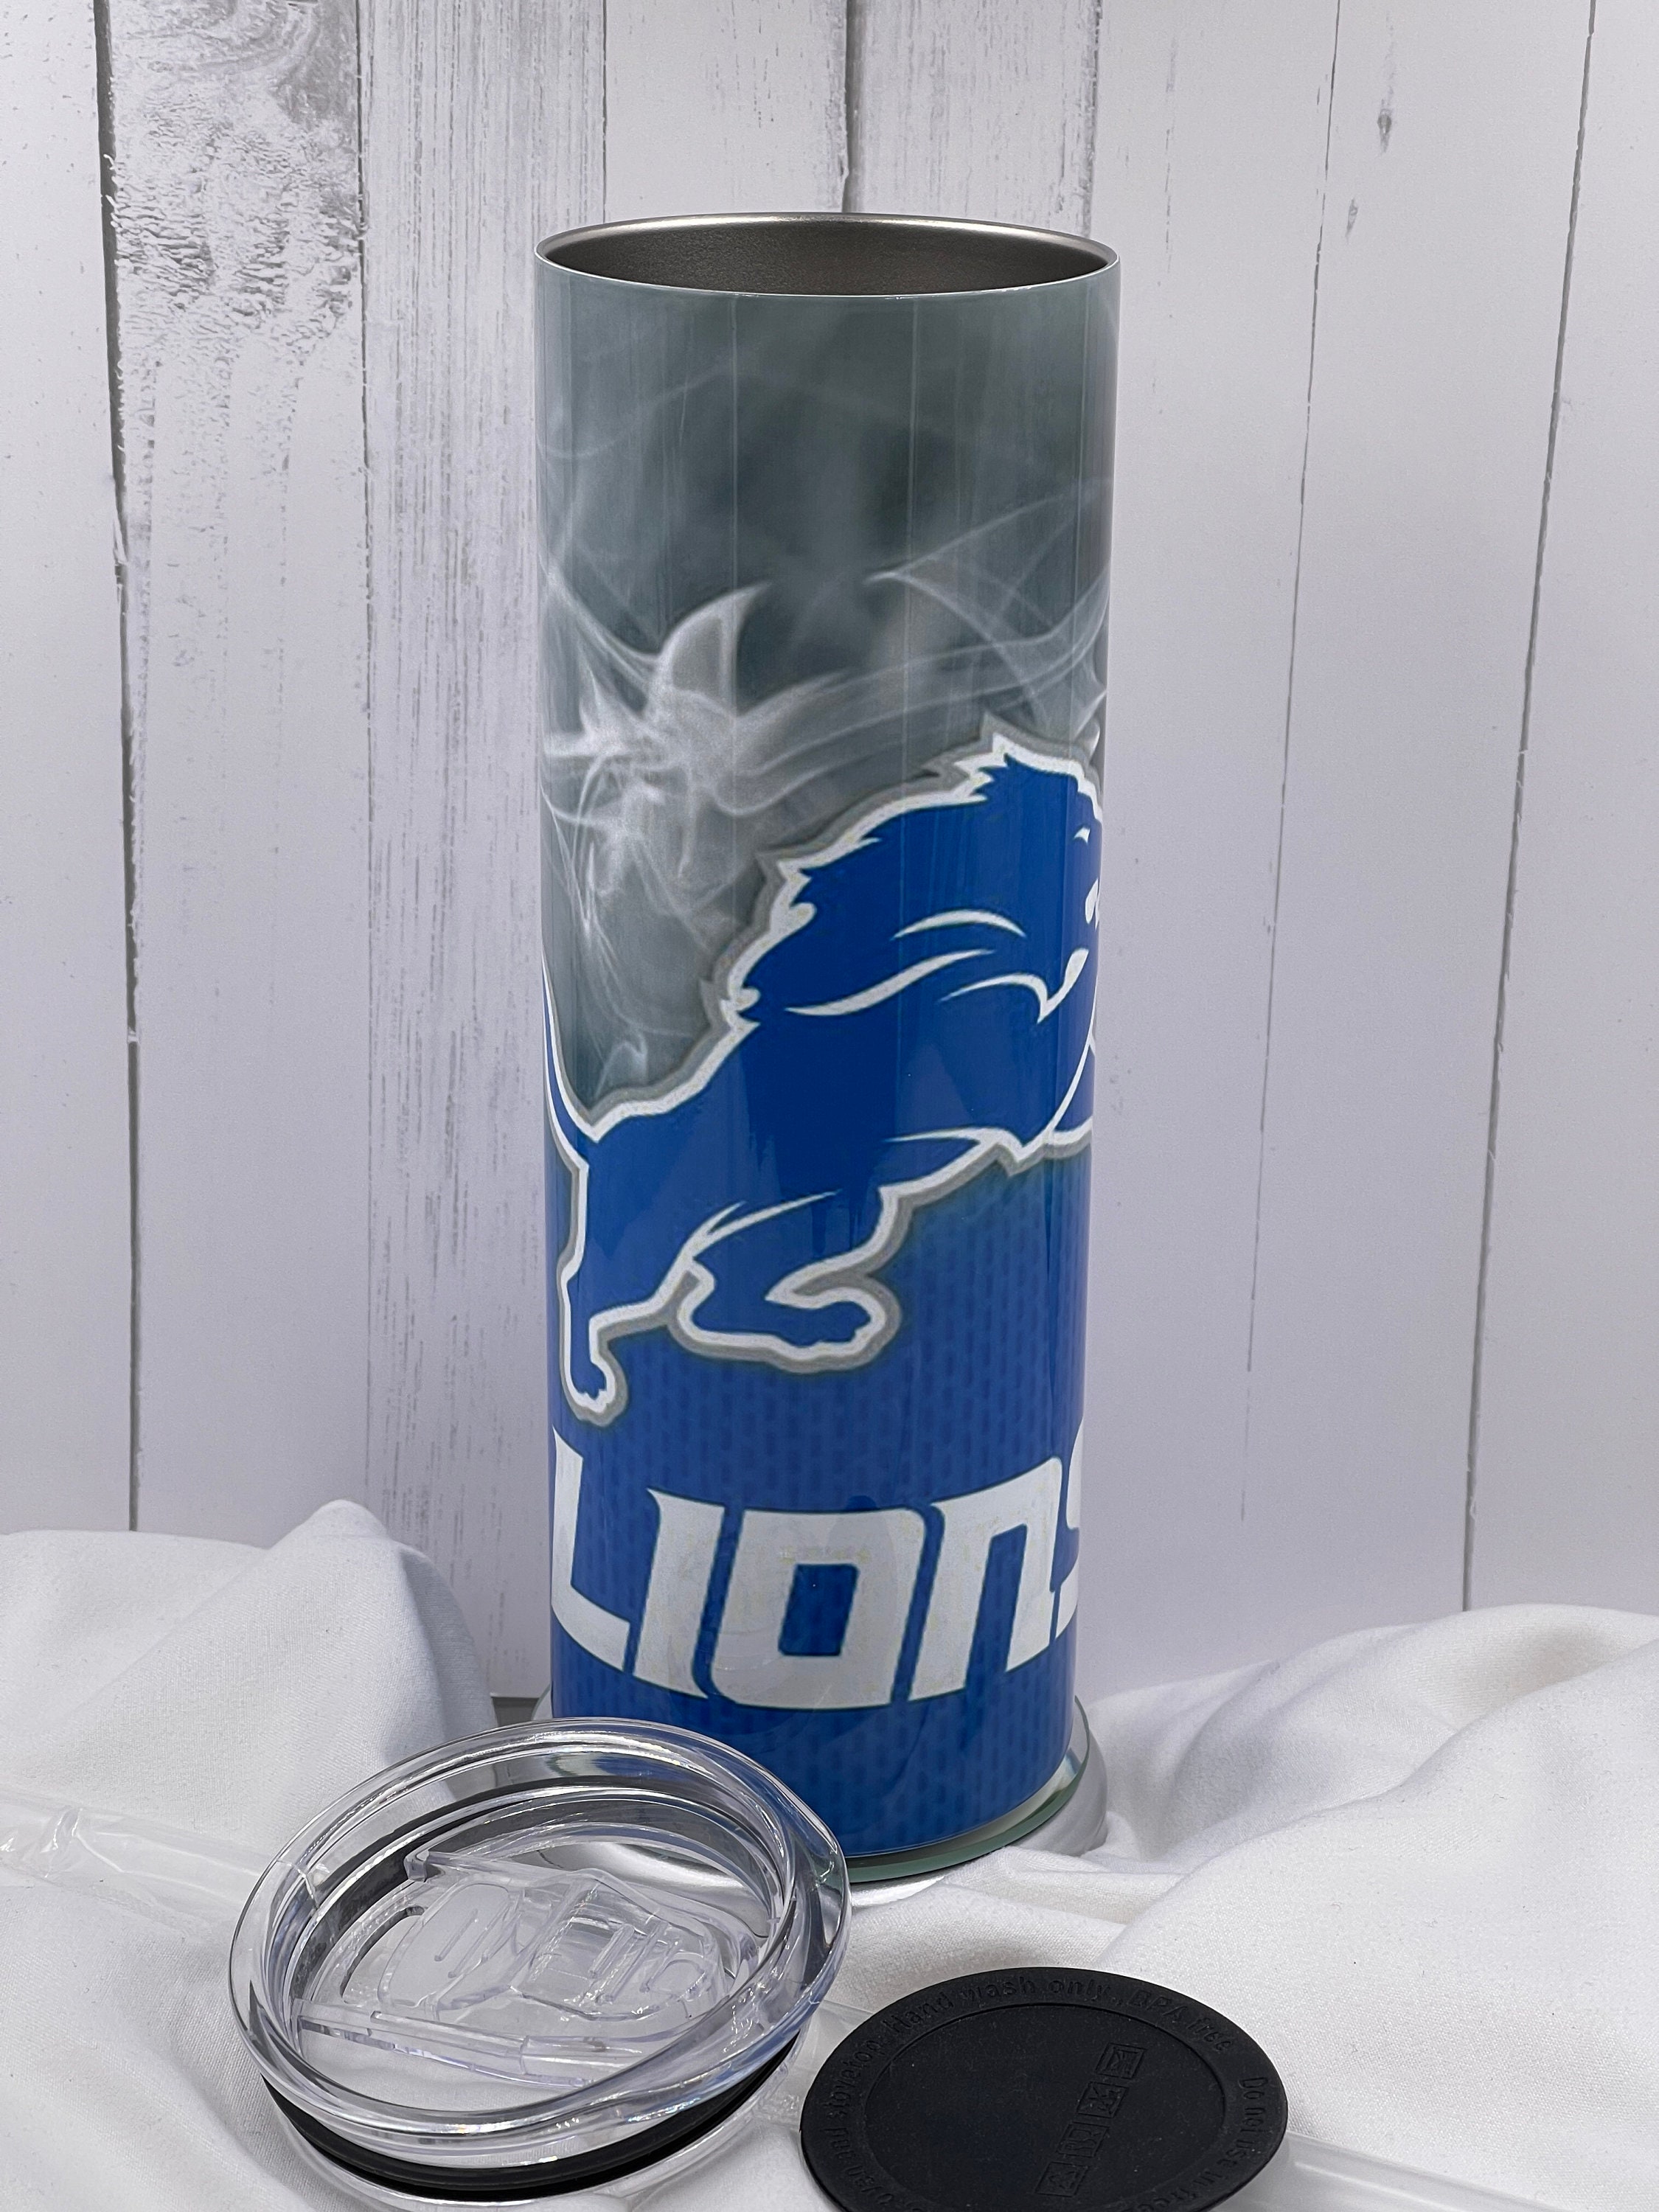 Detroit Lions 30 oz. Gameday Stainless Steel Tumbler - Sports Unlimited